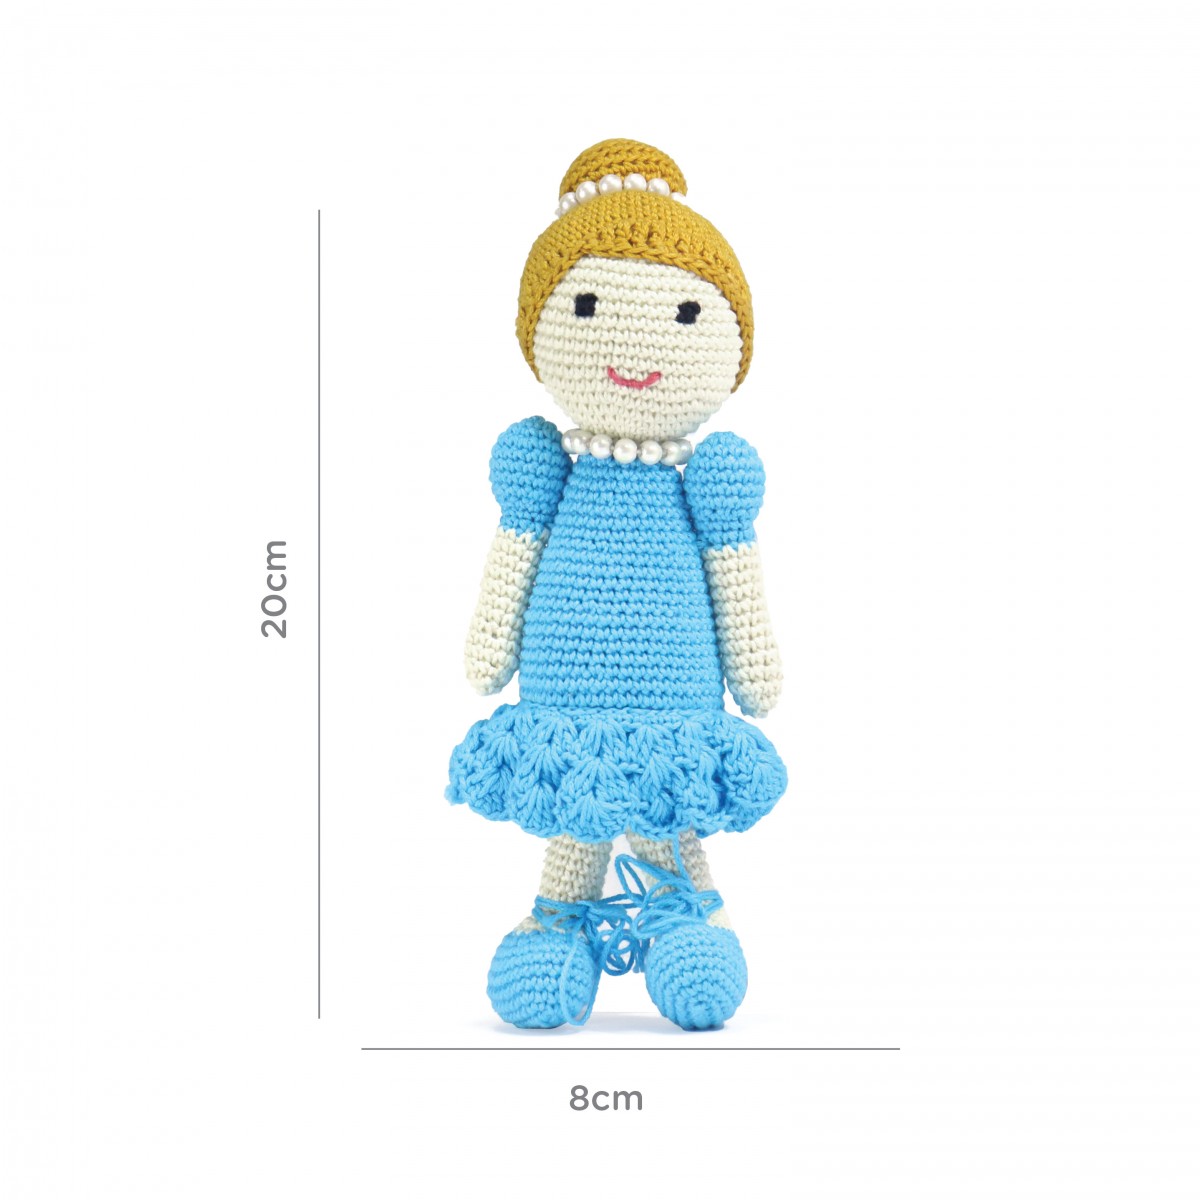 Nuluv Happy Threads Necklace Doll Blue 3Y+